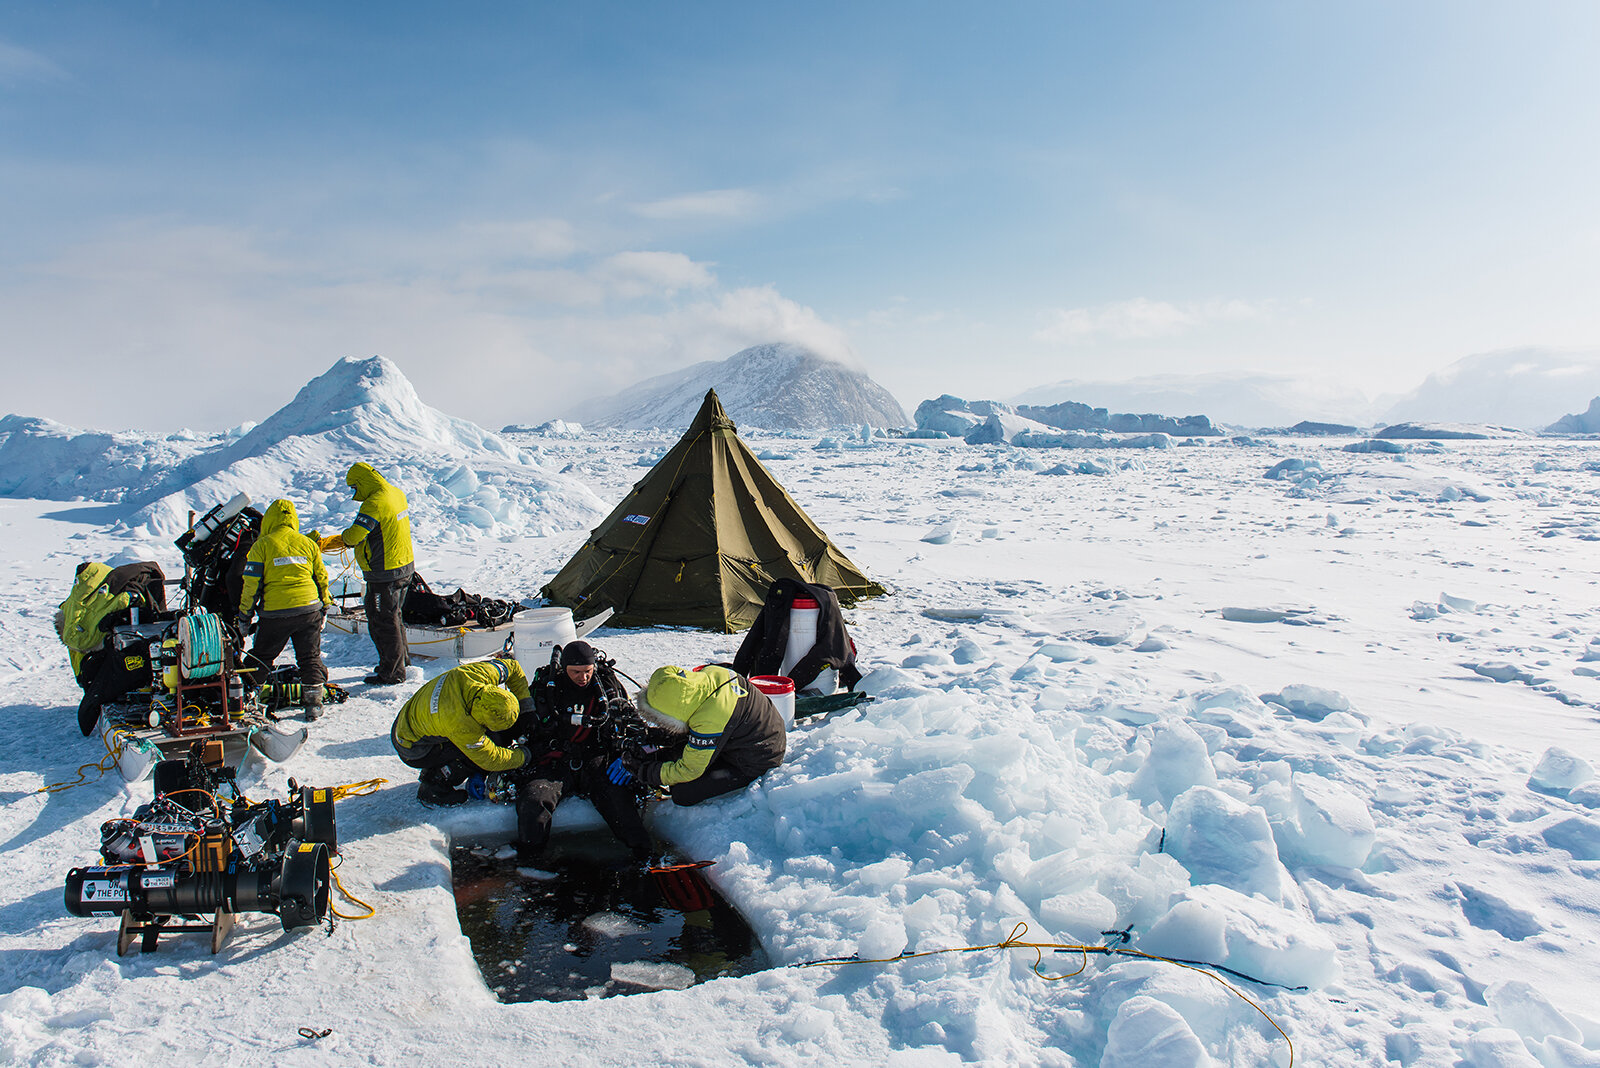 Polar divers are about to go diving under the ice in Greenland